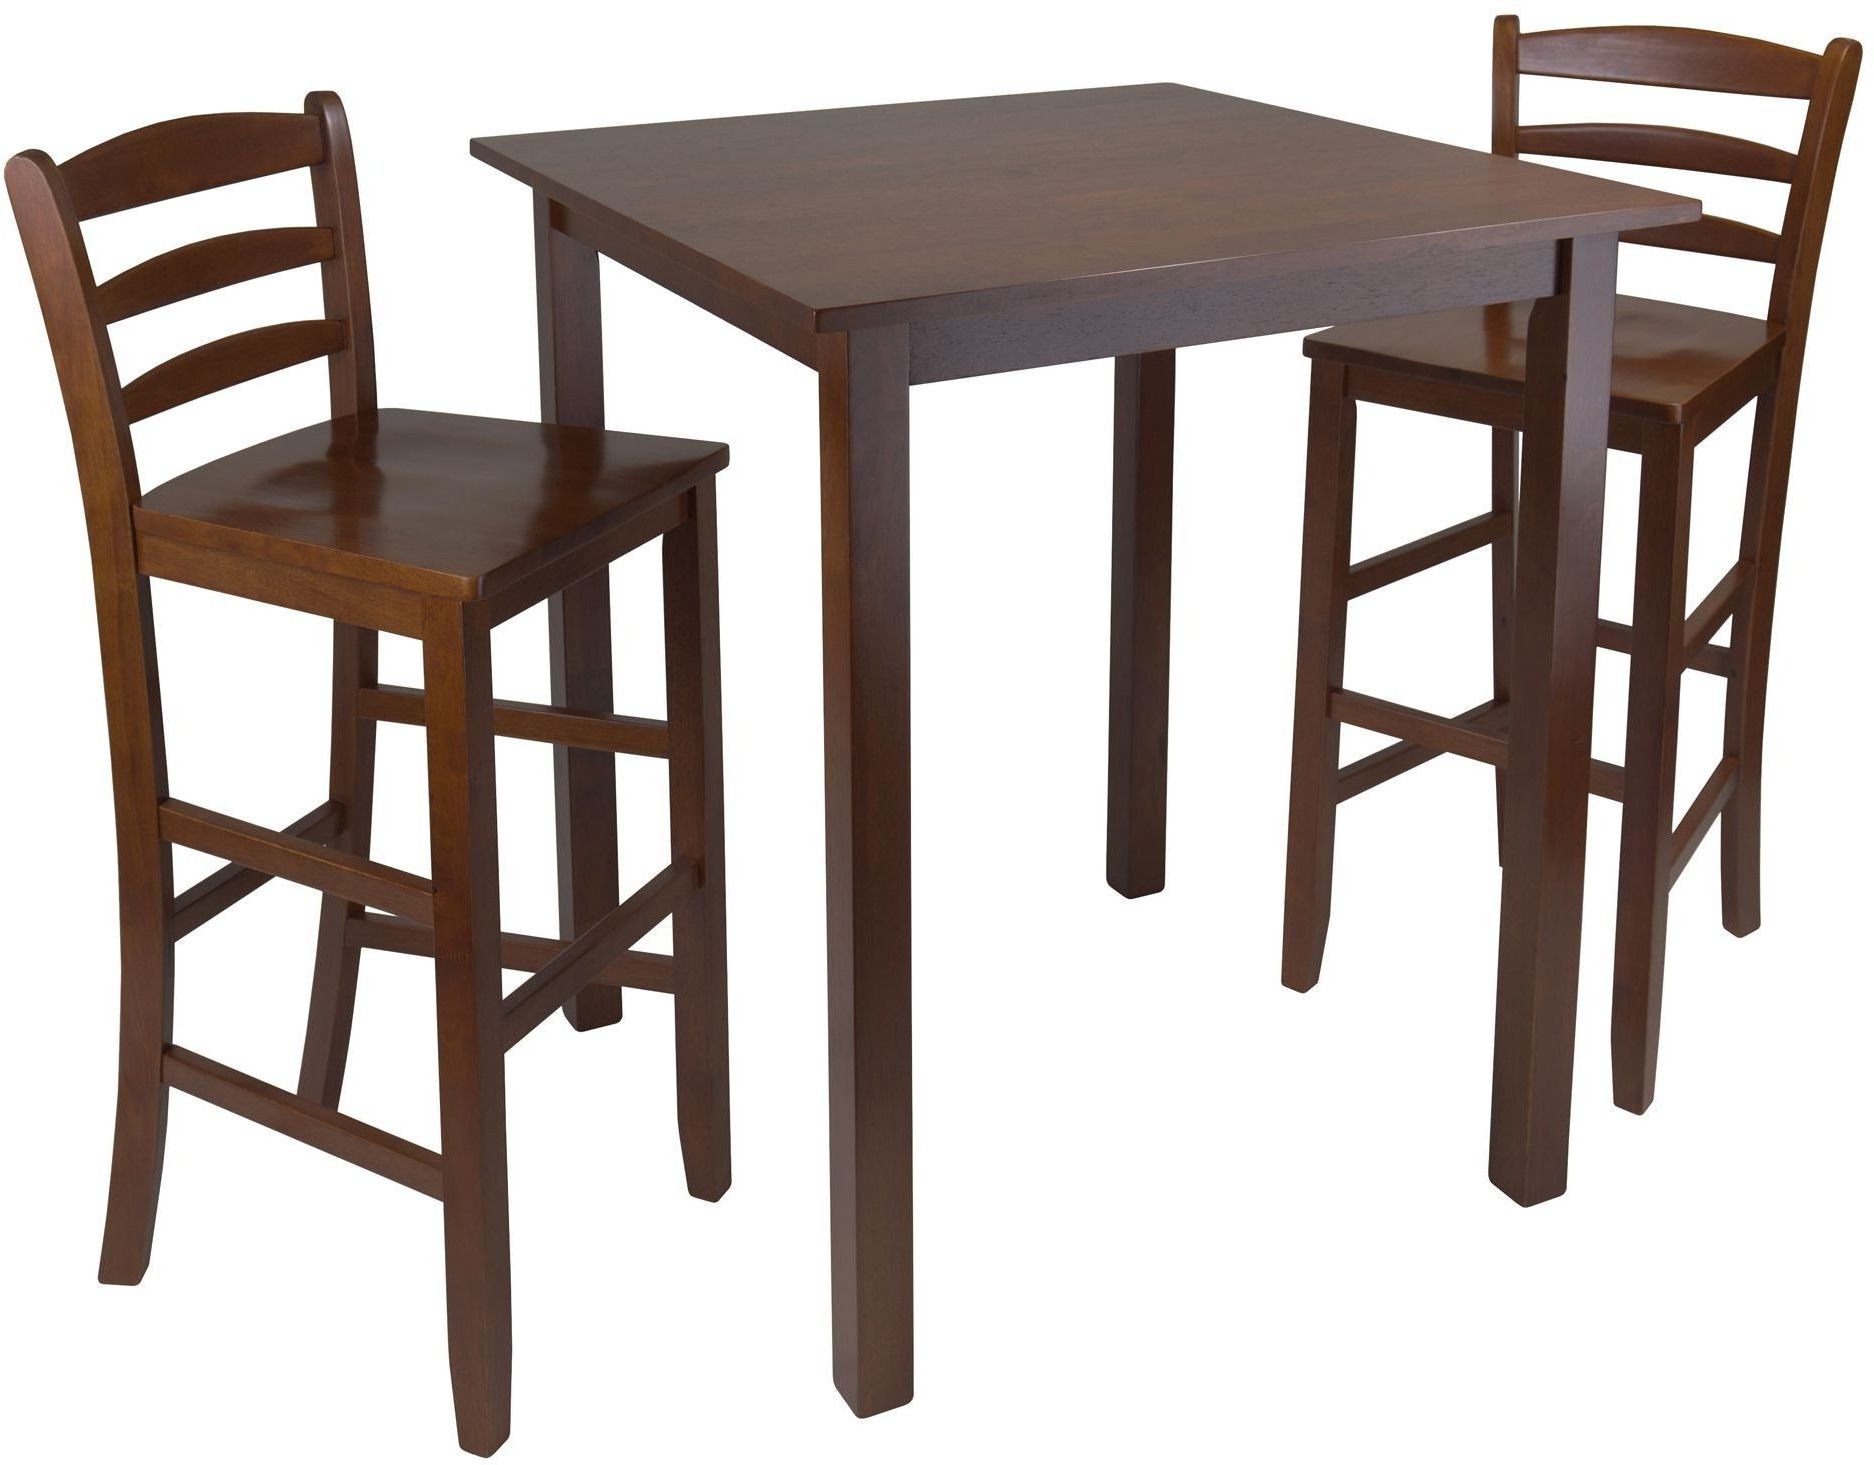 3 Piece Bistro Dining Sets Throughout Preferred Parkland Walnut 3 Piece Counter Height Dining Set With Ladder Back Bar (View 13 of 15)